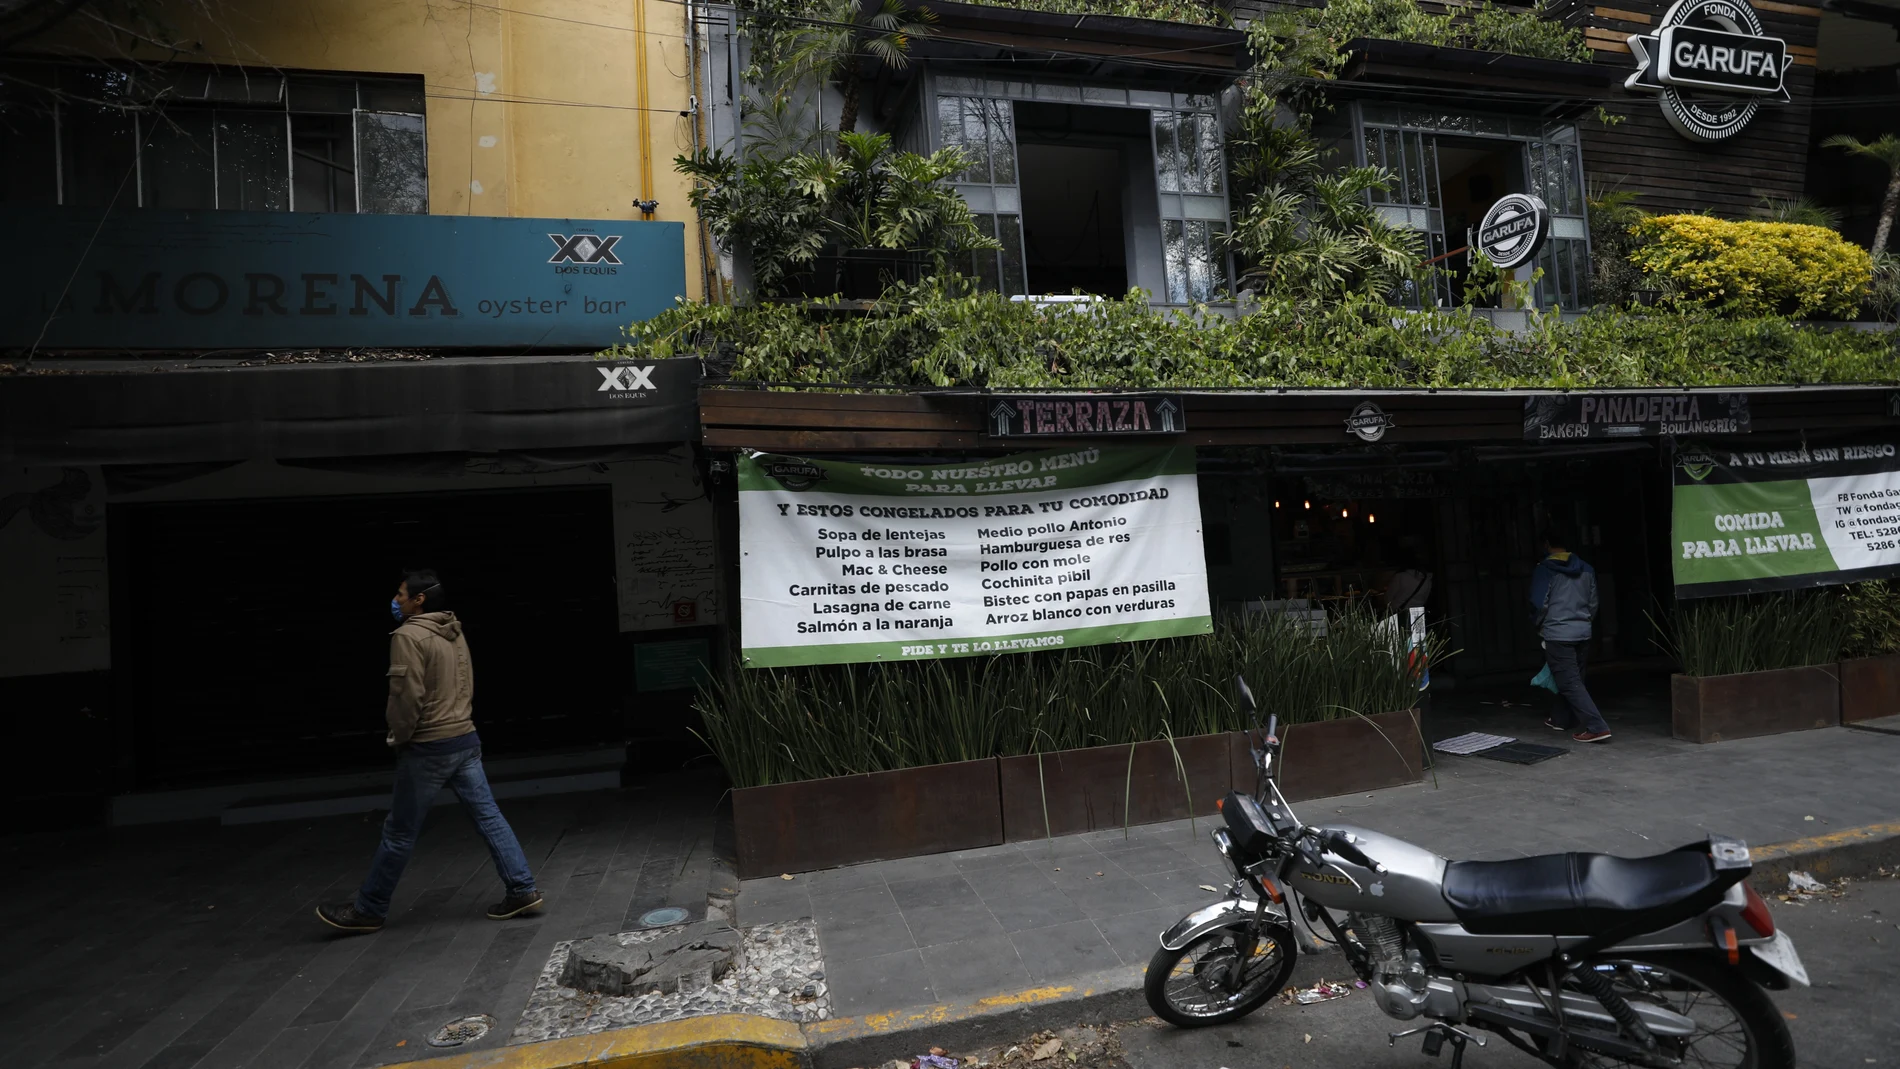 Signs advertise takeout service at a restaurant situated next to two others that have closed permanently amid the COVID-19 pandemic, in Mexico City, Sunday, Jan. 10, 2021. Worried about their ability to survive, many restaurants in the capital and adjacent Mexico State are banning together in a campaign dubbed "Abrir o Morir," Spanish for "Open or Die," and plan to open their doors to diners again on Monday in defiance of ordinances limiting restaurants to take-out service while the Mexico Valley remains under red alert with hospitals nearing full capacity. (AP Photo/Rebecca Blackwell)